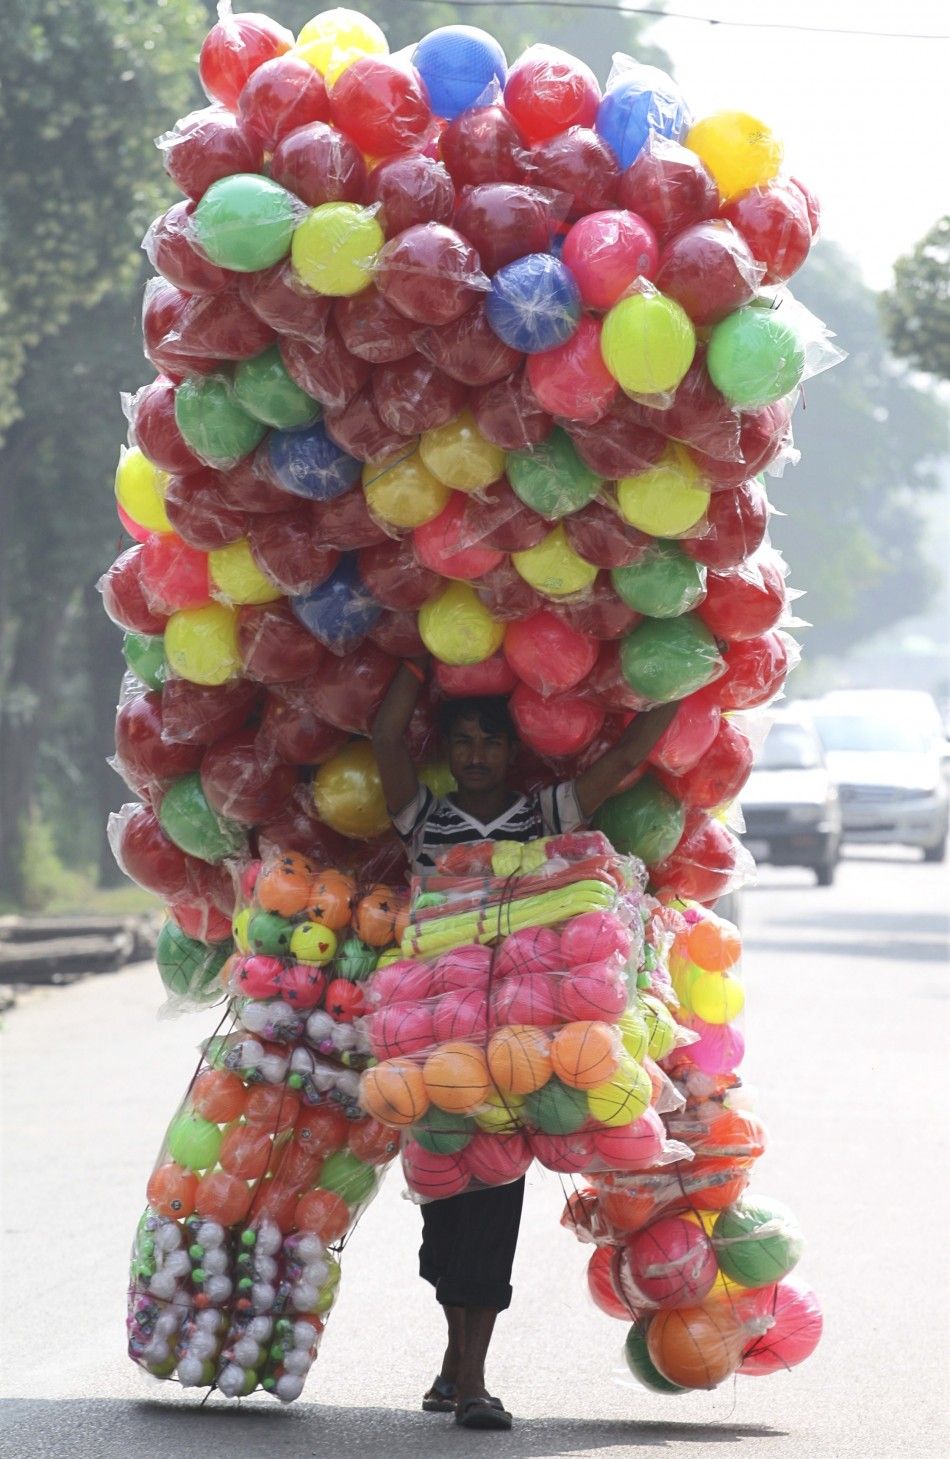 A vendor carries plastic balls for sale as he walks down the streets of Noida